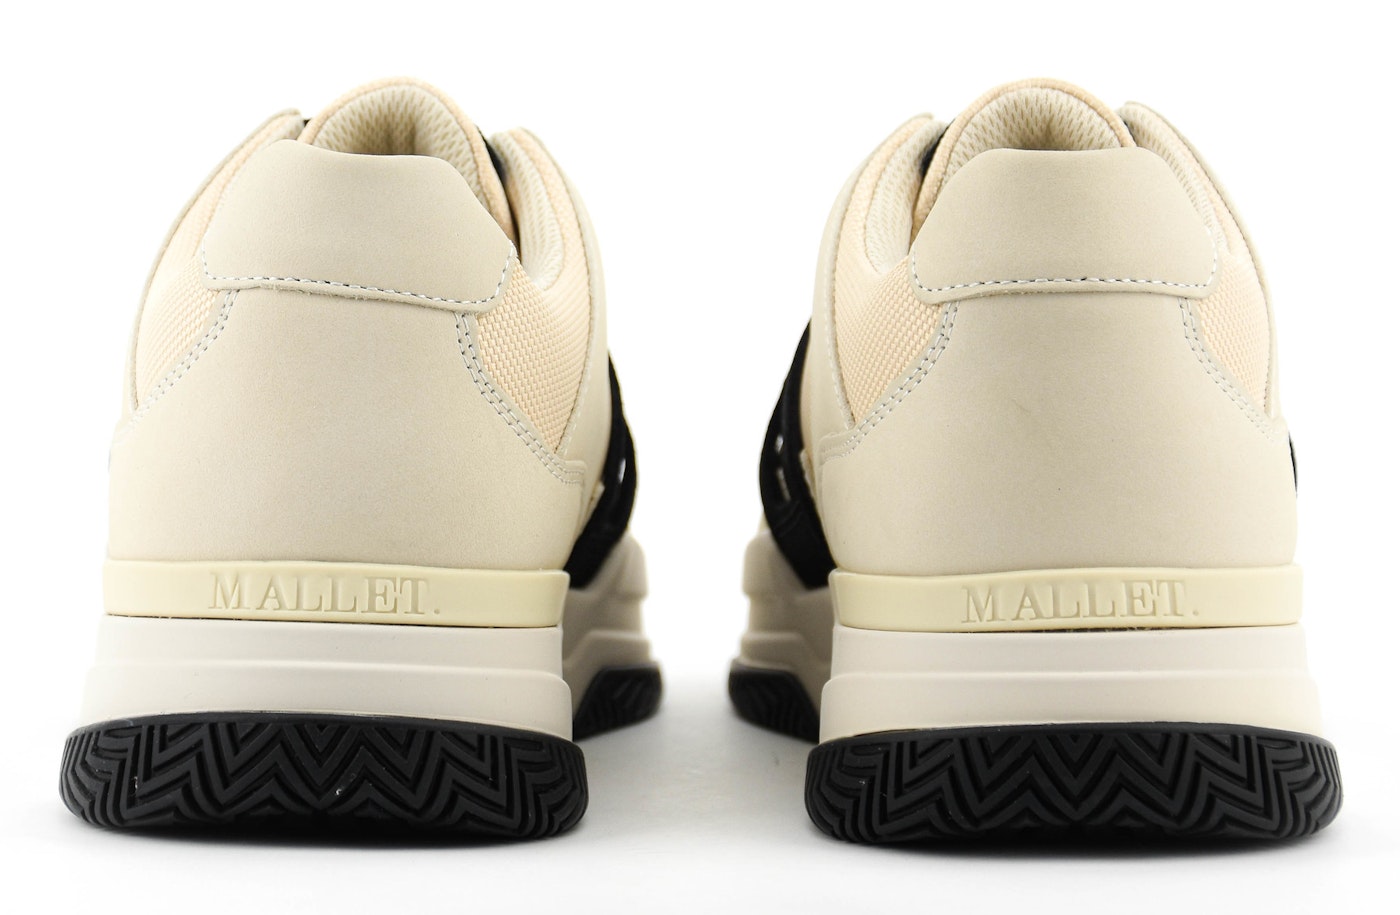 MALLET MARQUES SAND